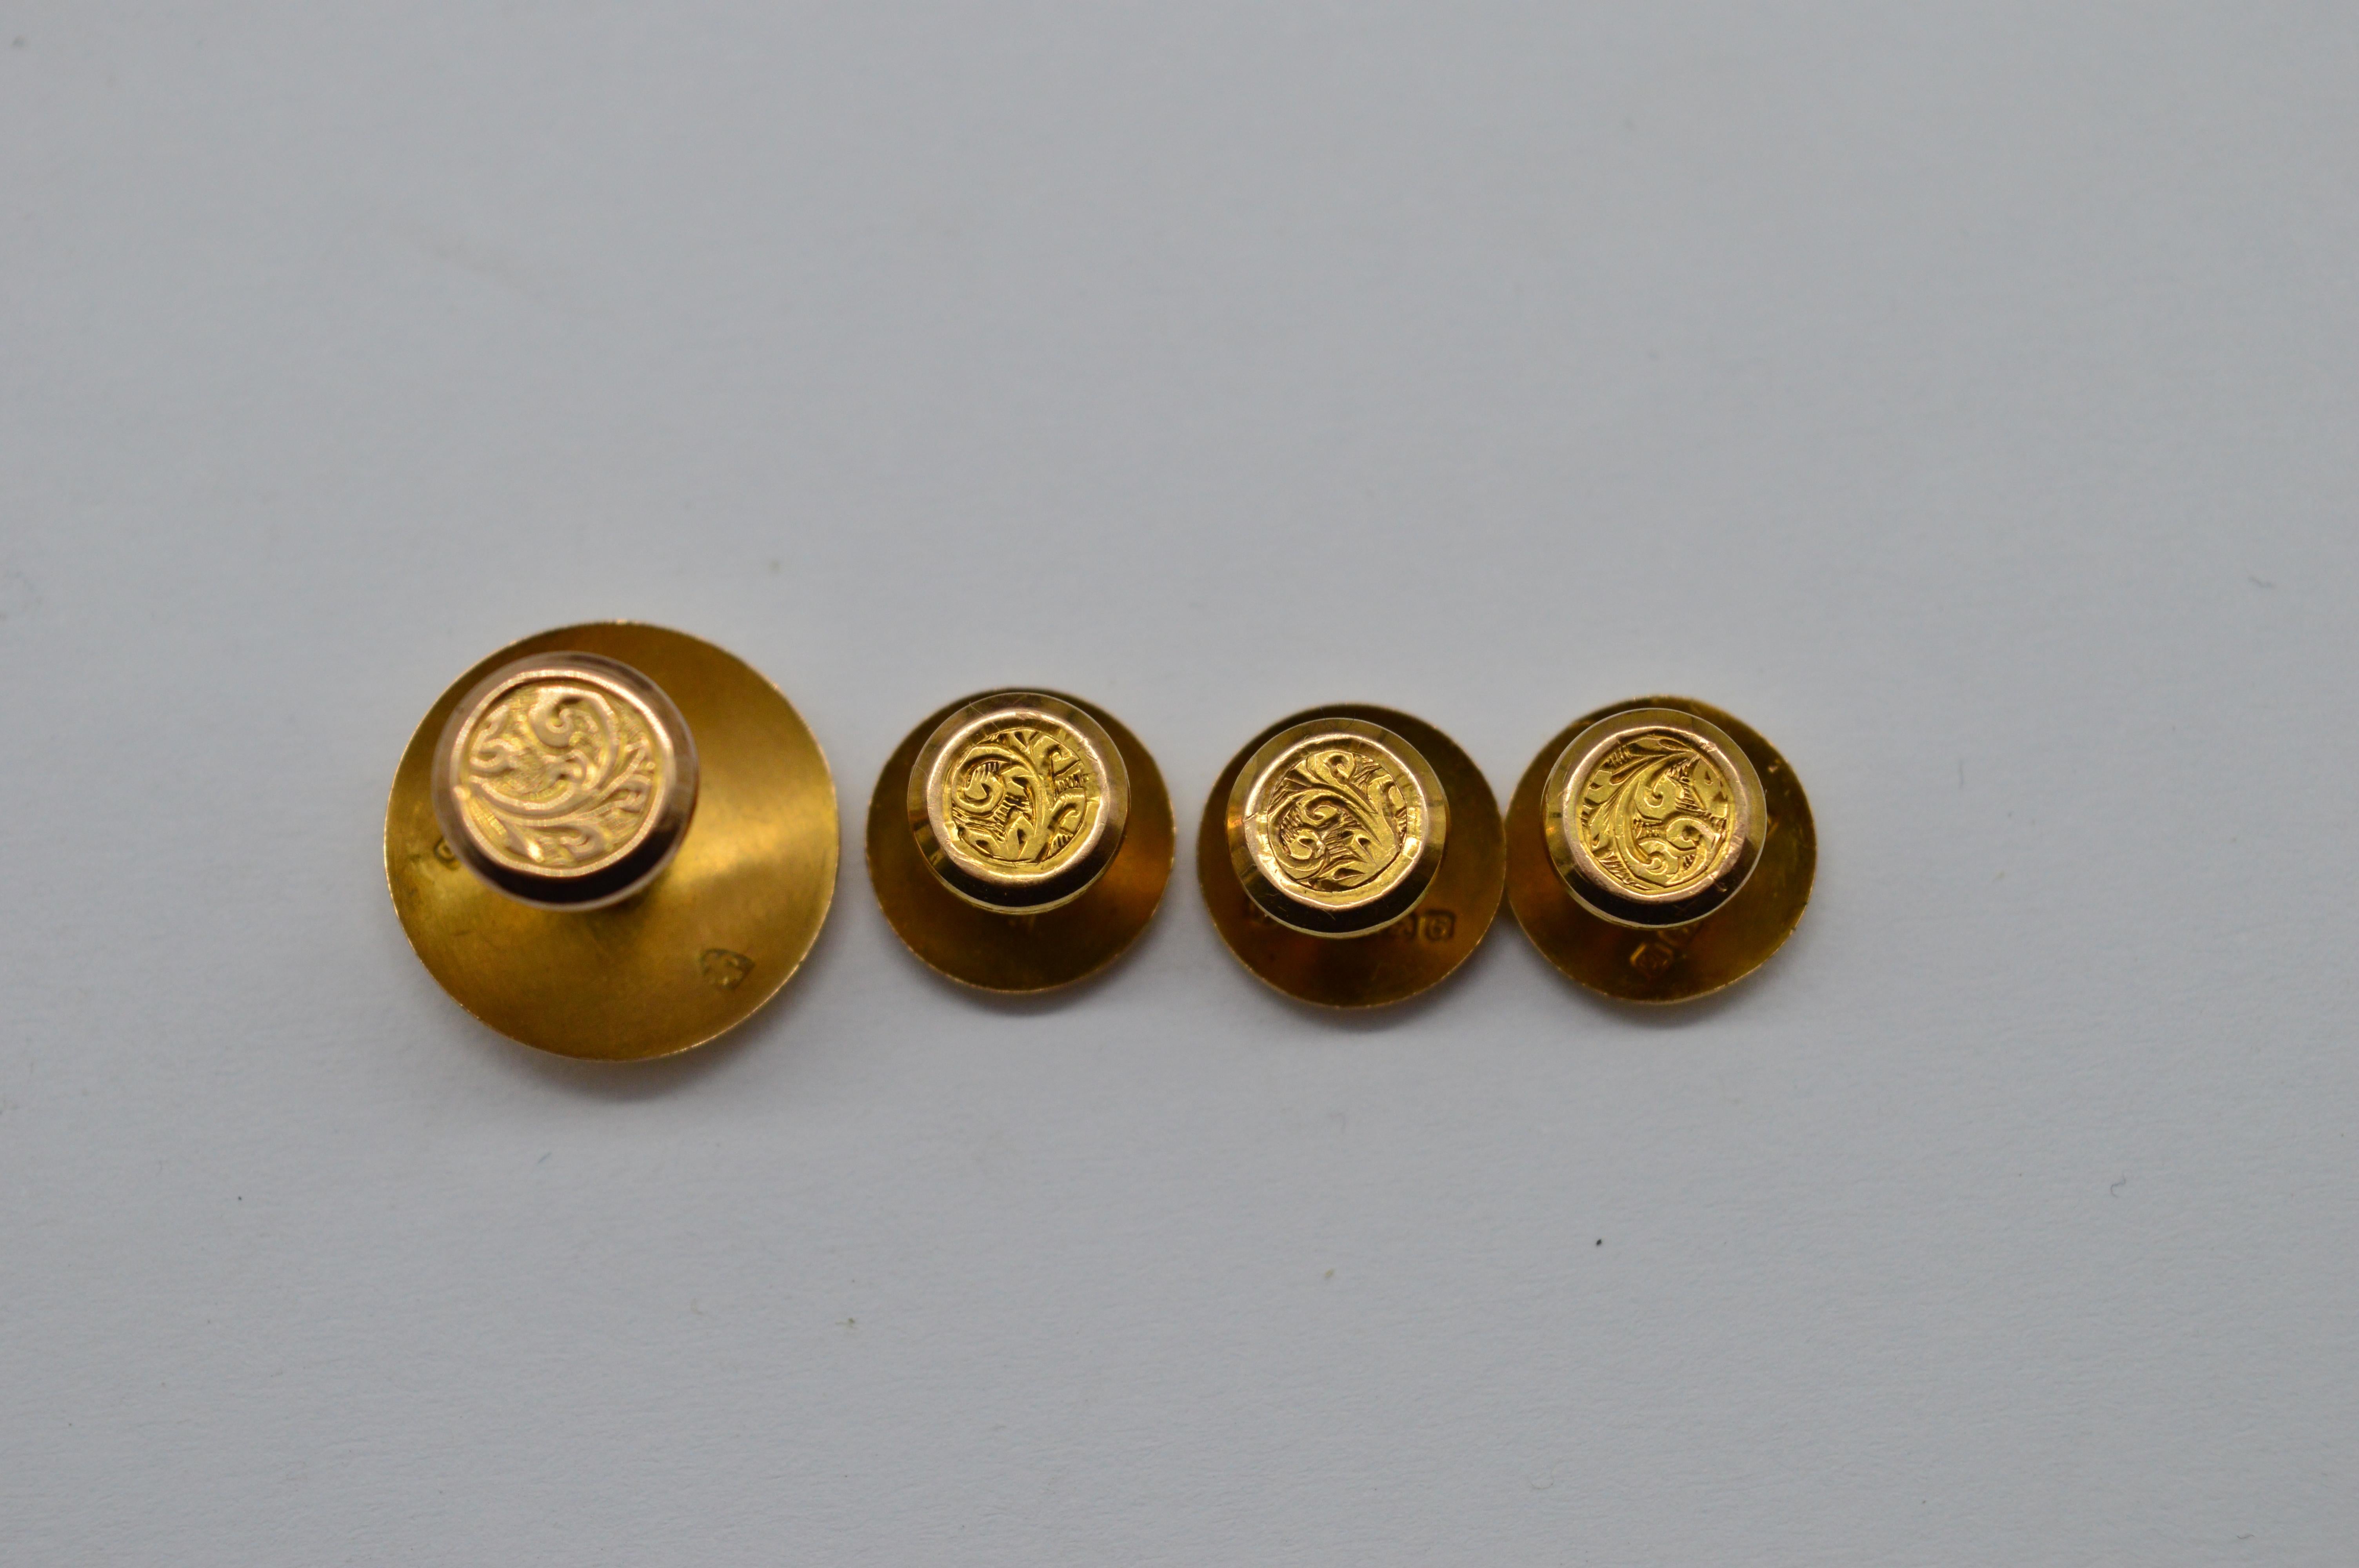 Antique Victorian 1901 9K Yellow Gold Engraved Cufflinks Stud Set Boxed For Sale 3